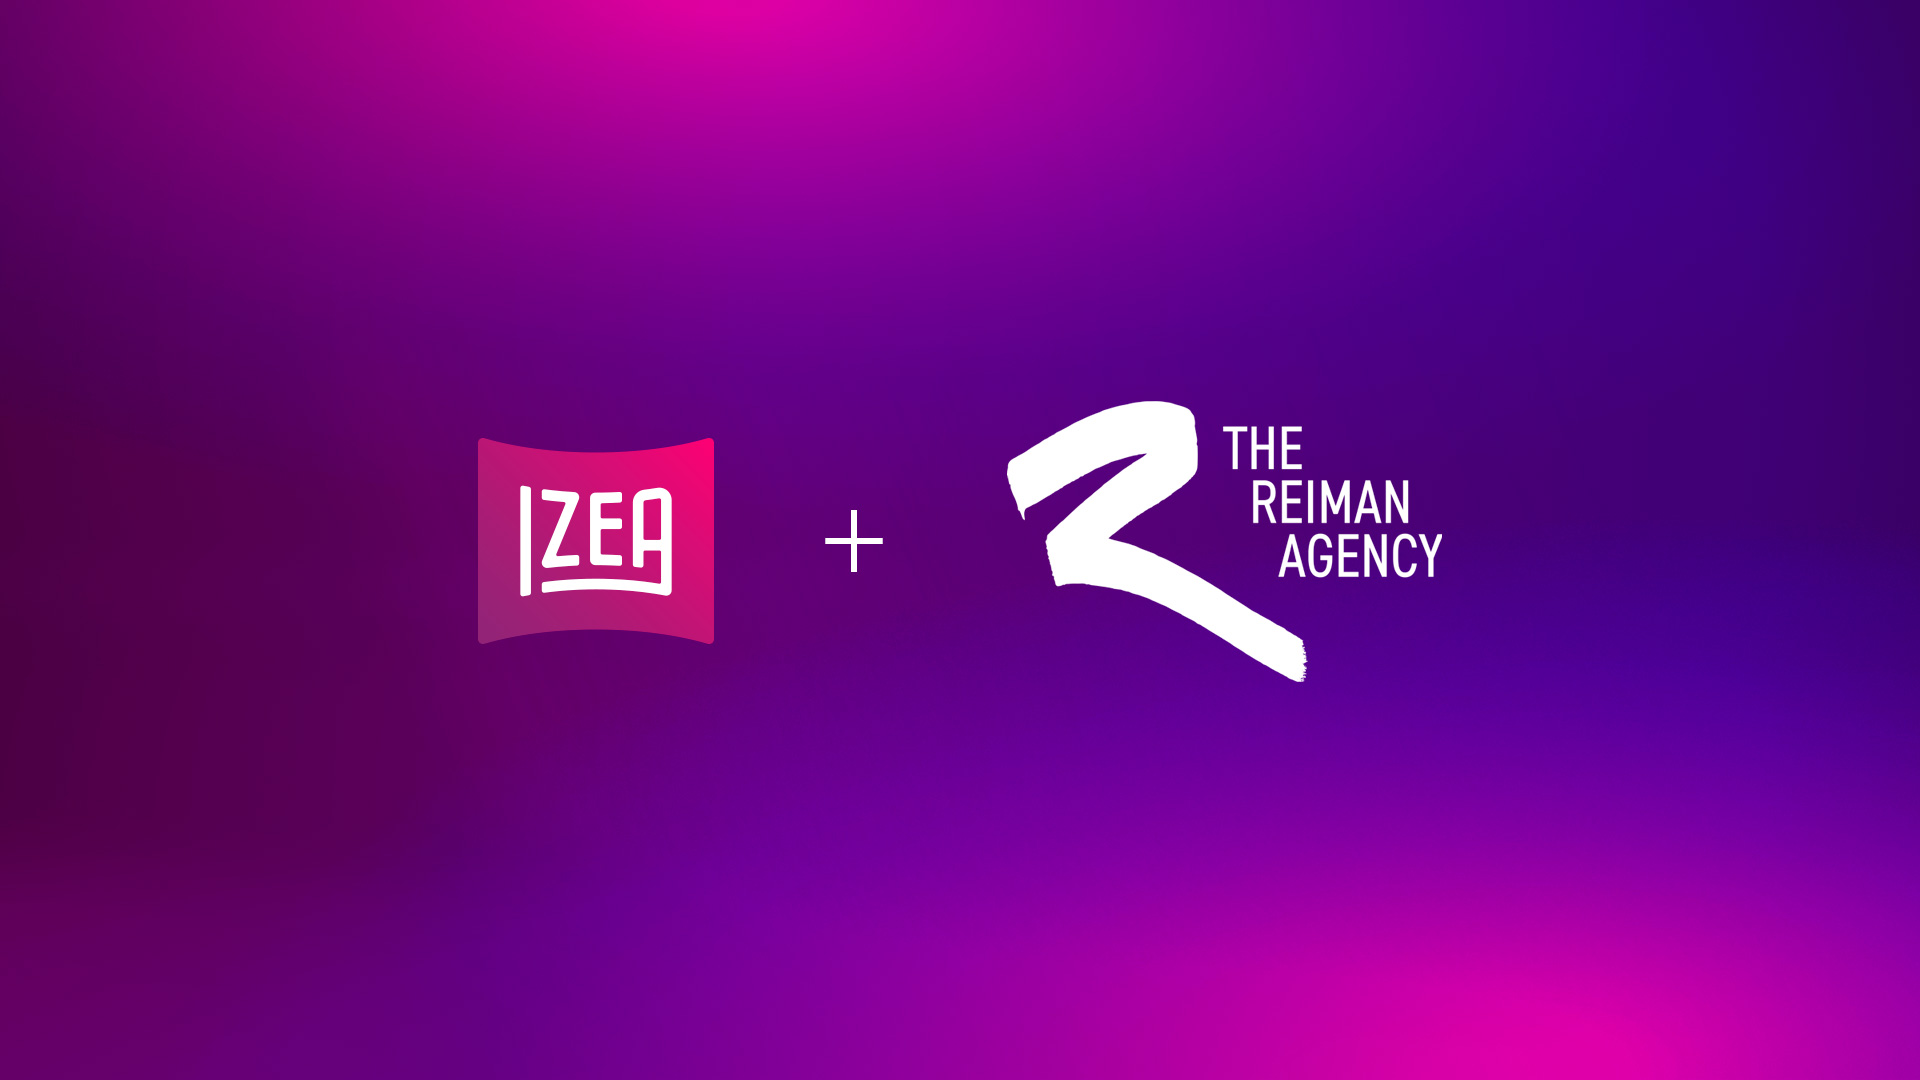 IZEA and The Reiman Agency